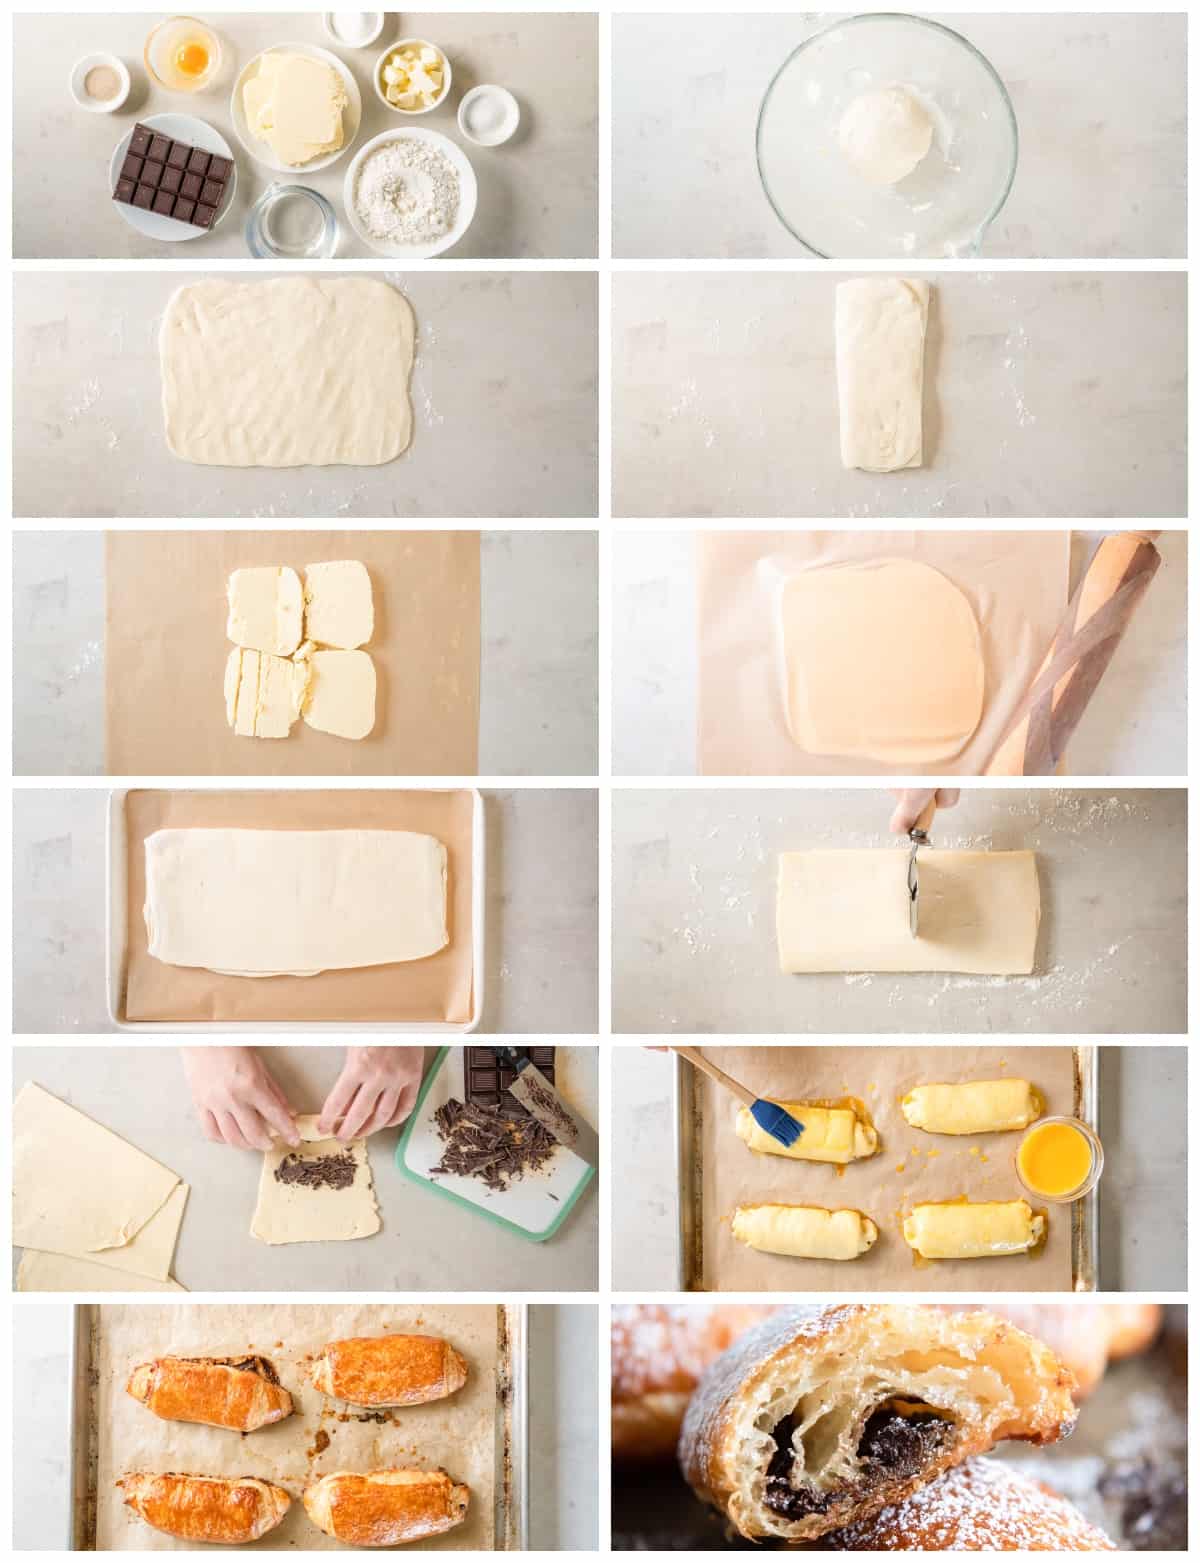 how to make chocolate croissants step by step photo instructions